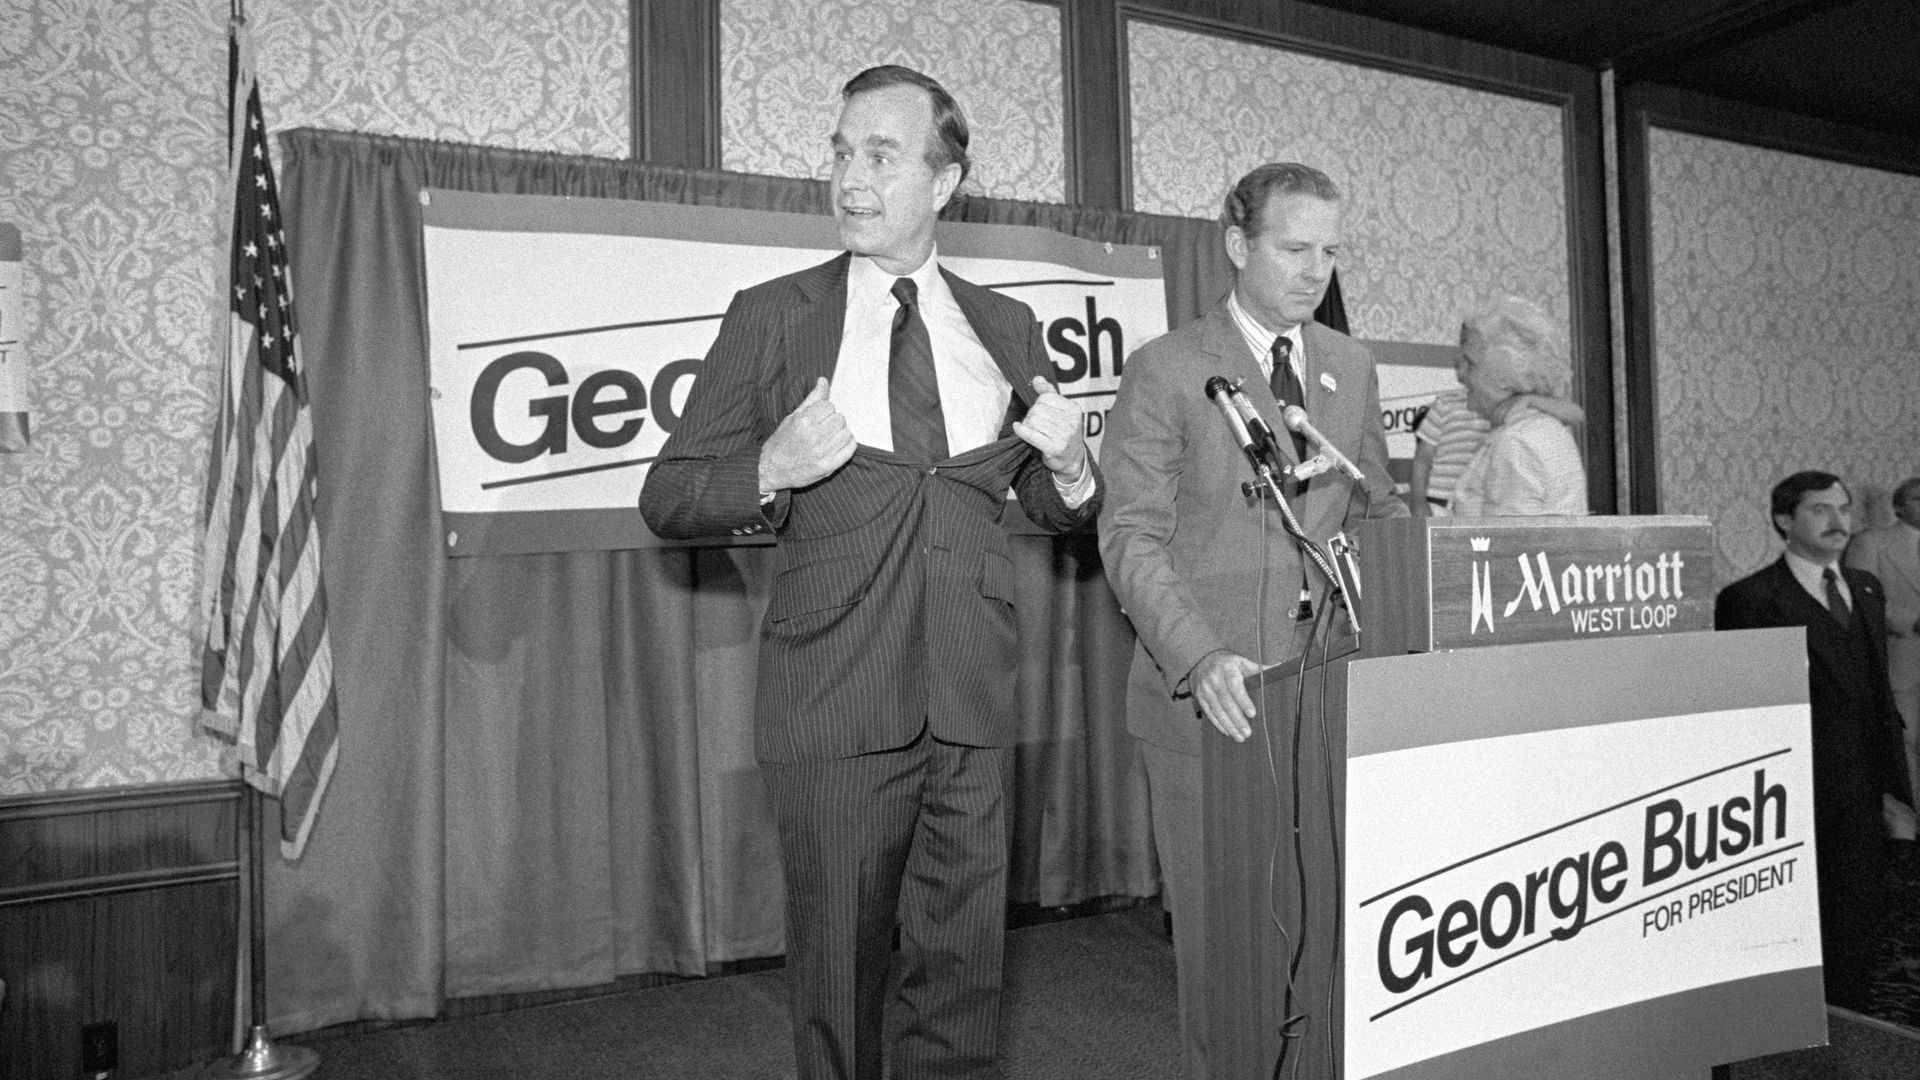 In 1980, Bush campaign manager James Baker stands at the podium while George H.W. Bush makes a joking gesture when told to loosen it up. 